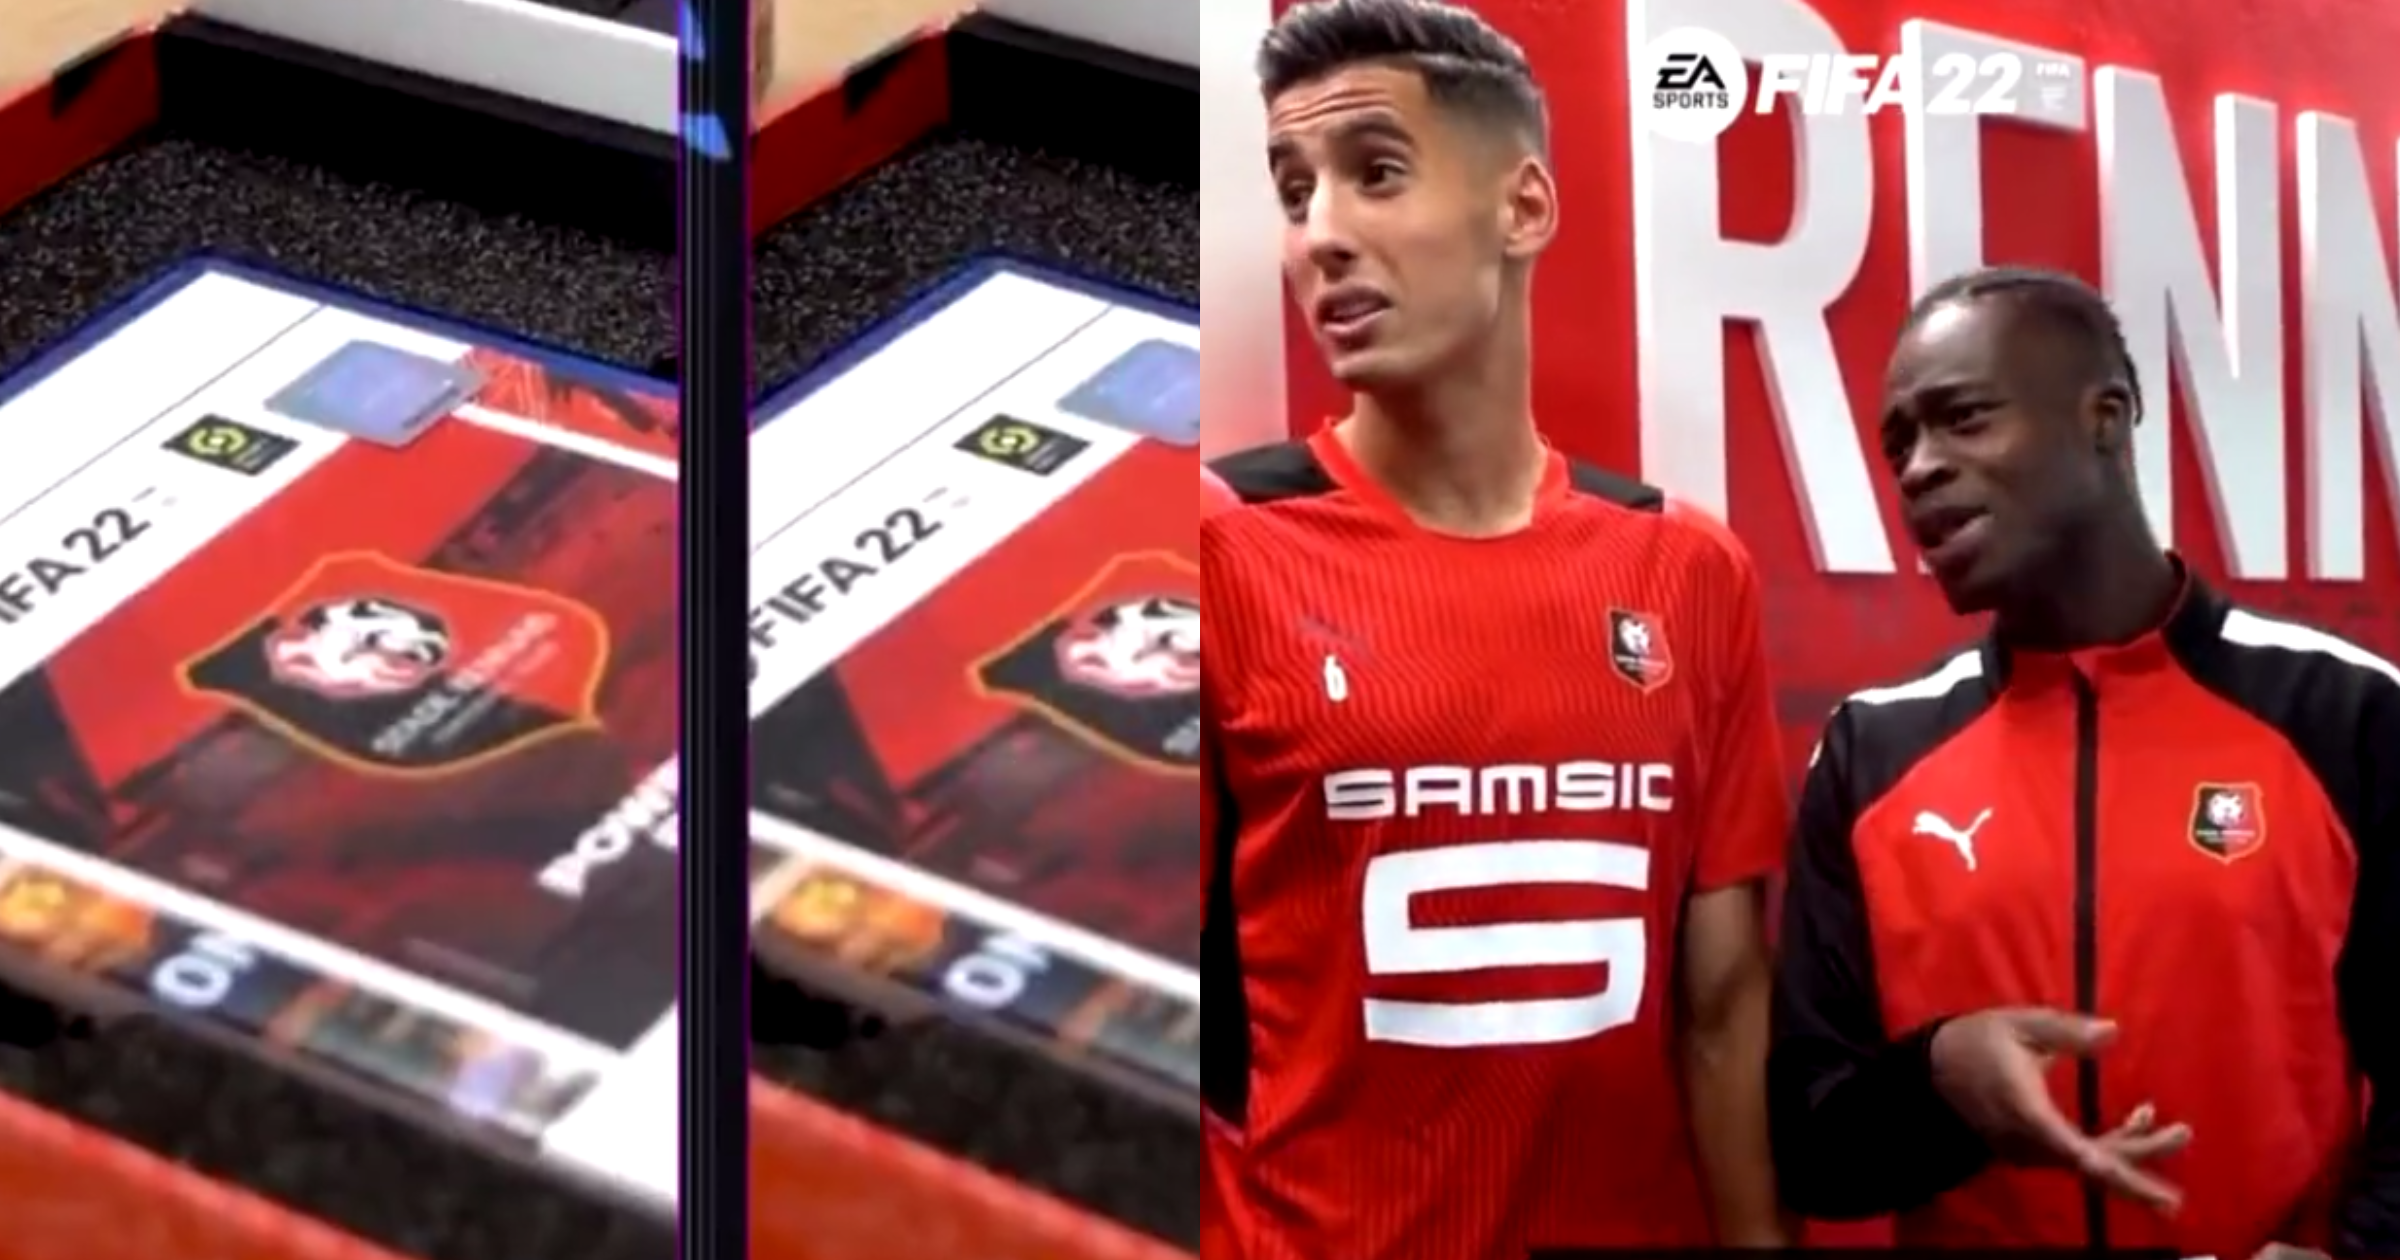 I'm the best dribbler here - Kamaldeen Suleman 'cries' over 'low' rating in FIFA 22 game, Video drops